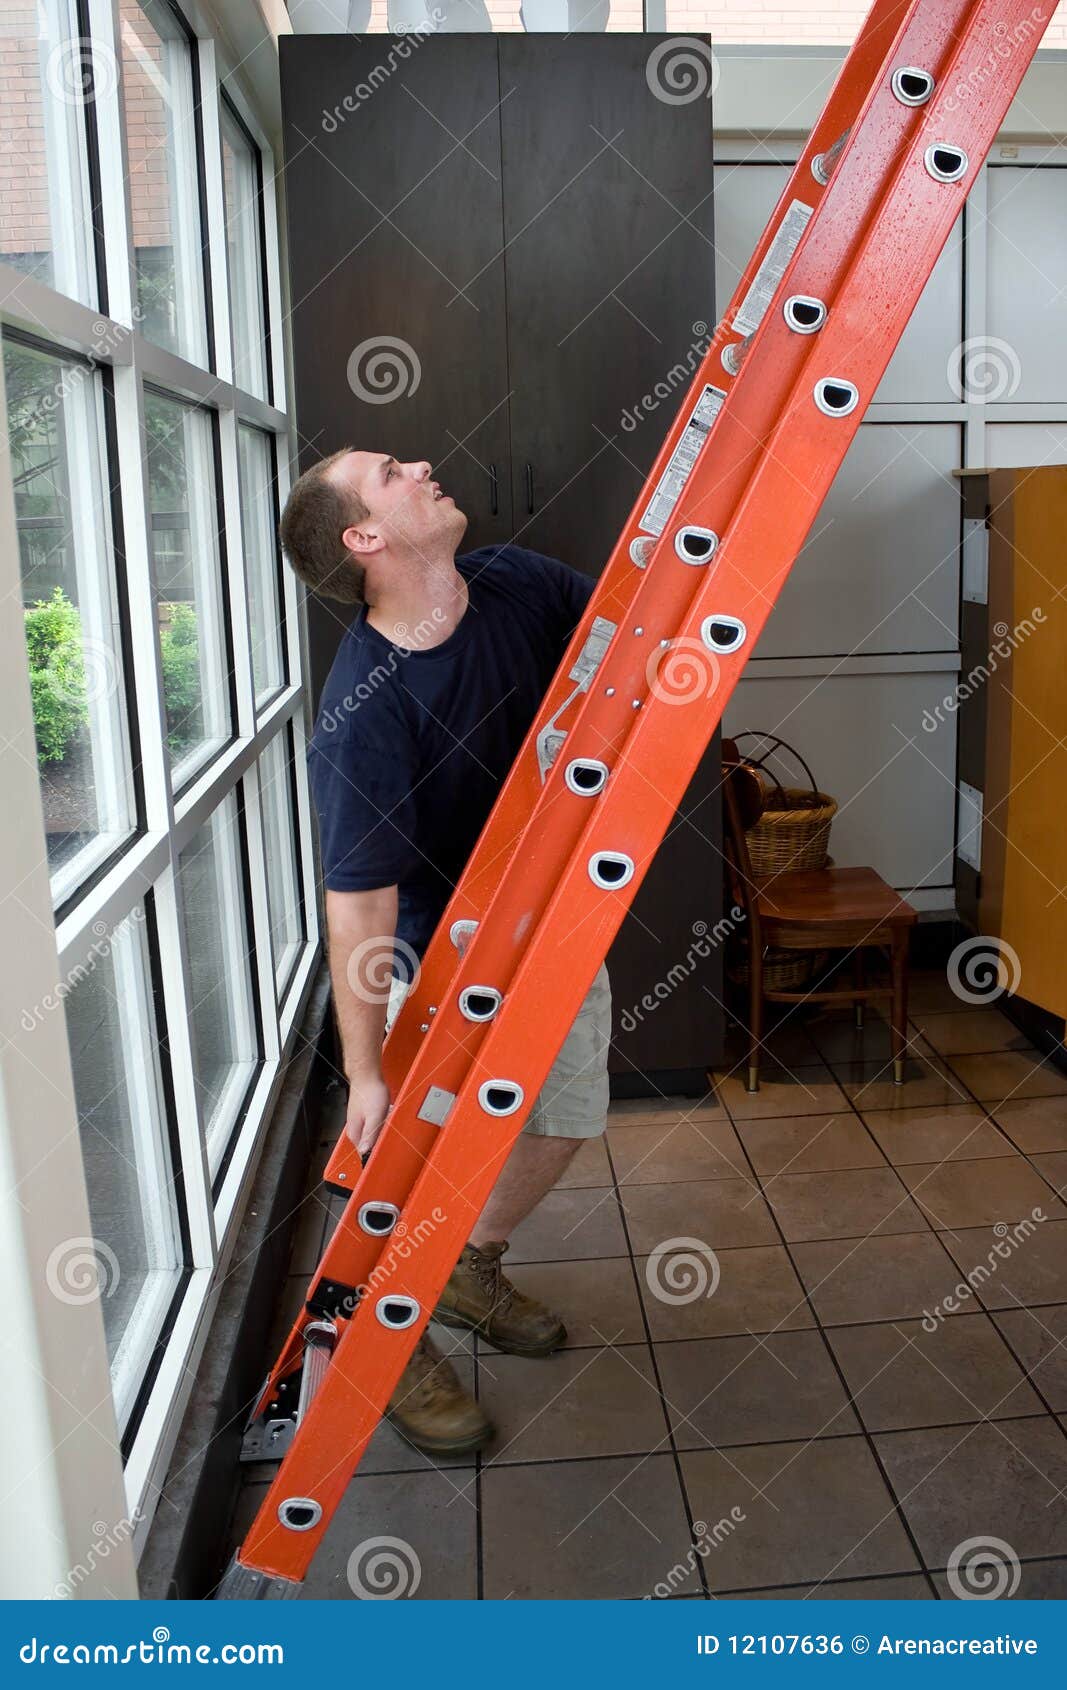 setting up a ladder